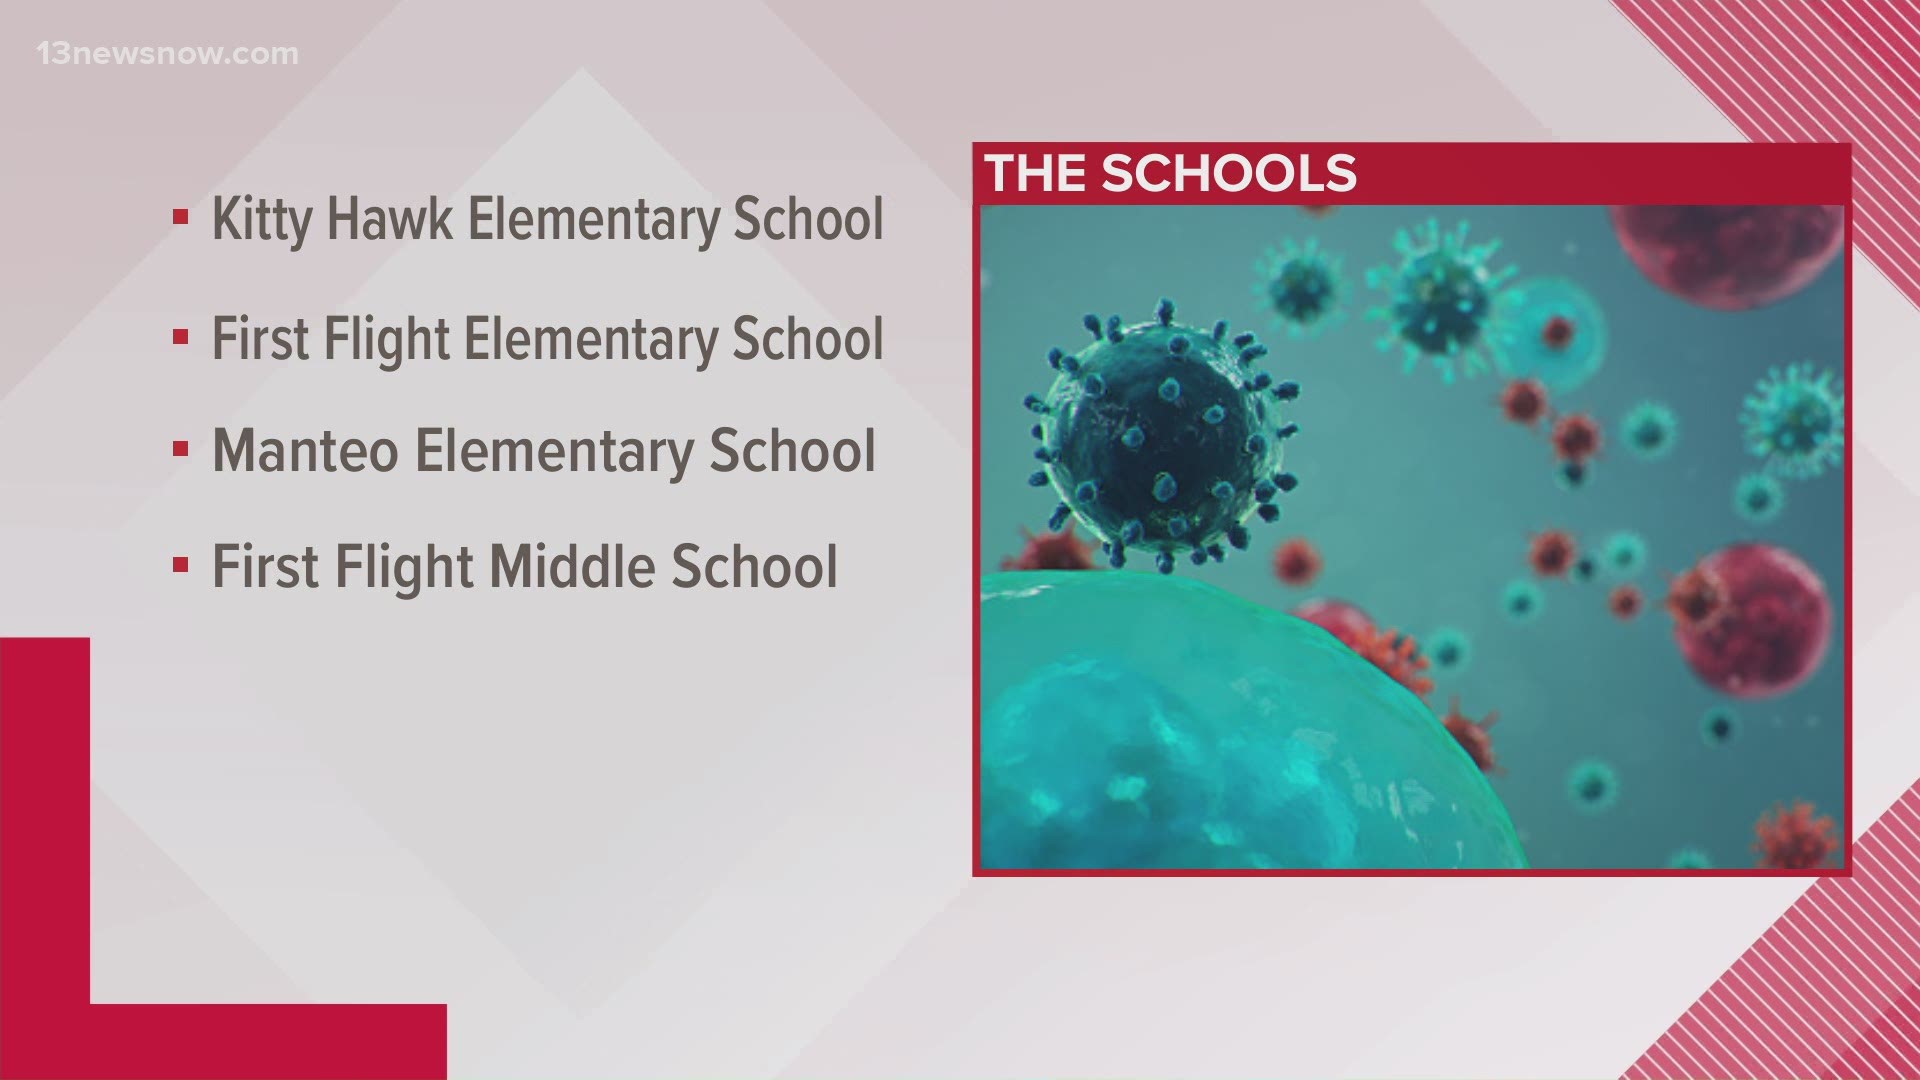 Seven new confirmed COVID-19 cases were reported in some Dare County Schools, closing down four schools for deep cleaning.